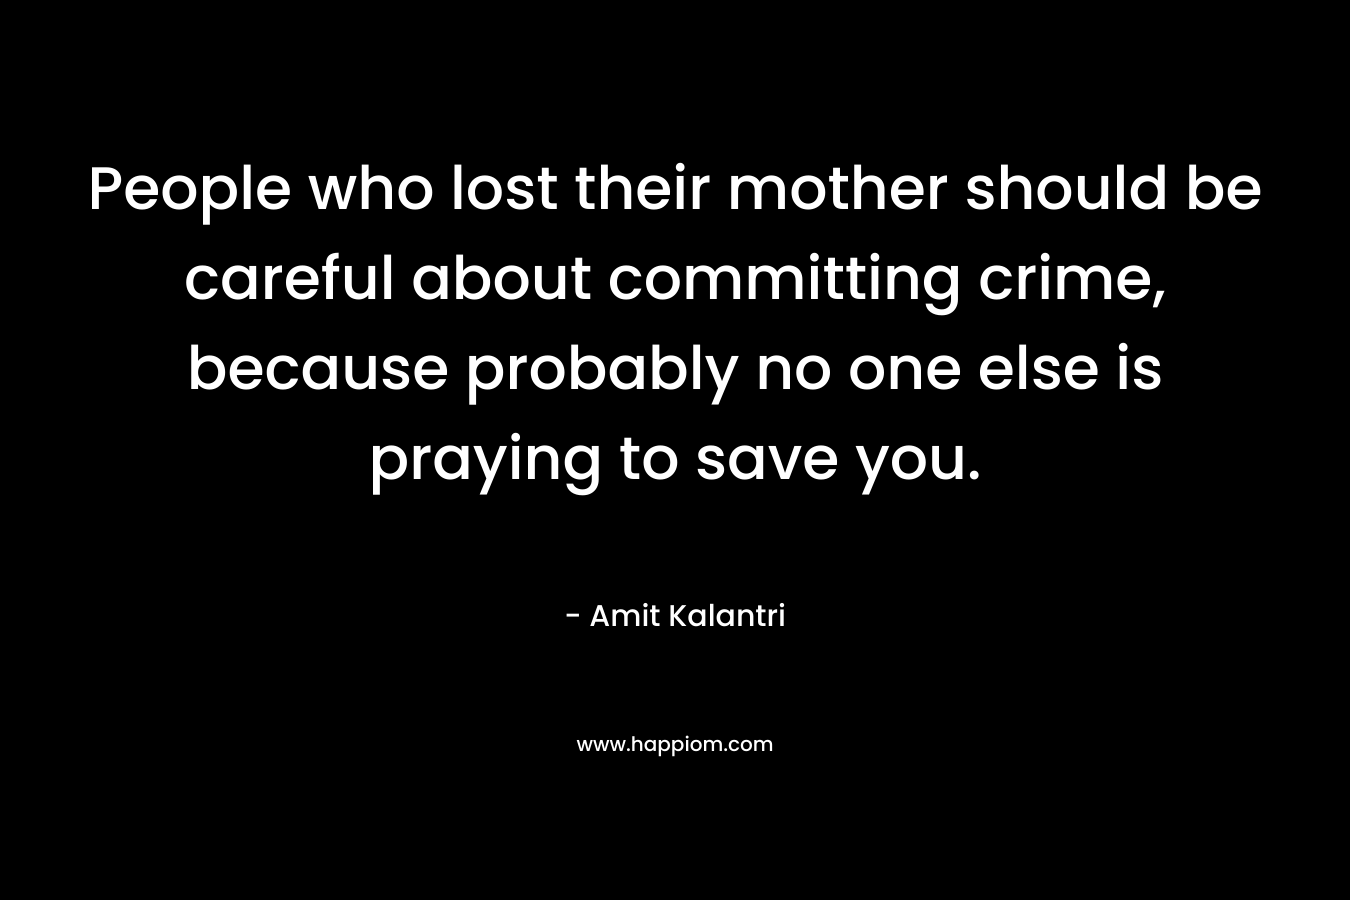 People who lost their mother should be careful about committing crime, because probably no one else is praying to save you. – Amit Kalantri